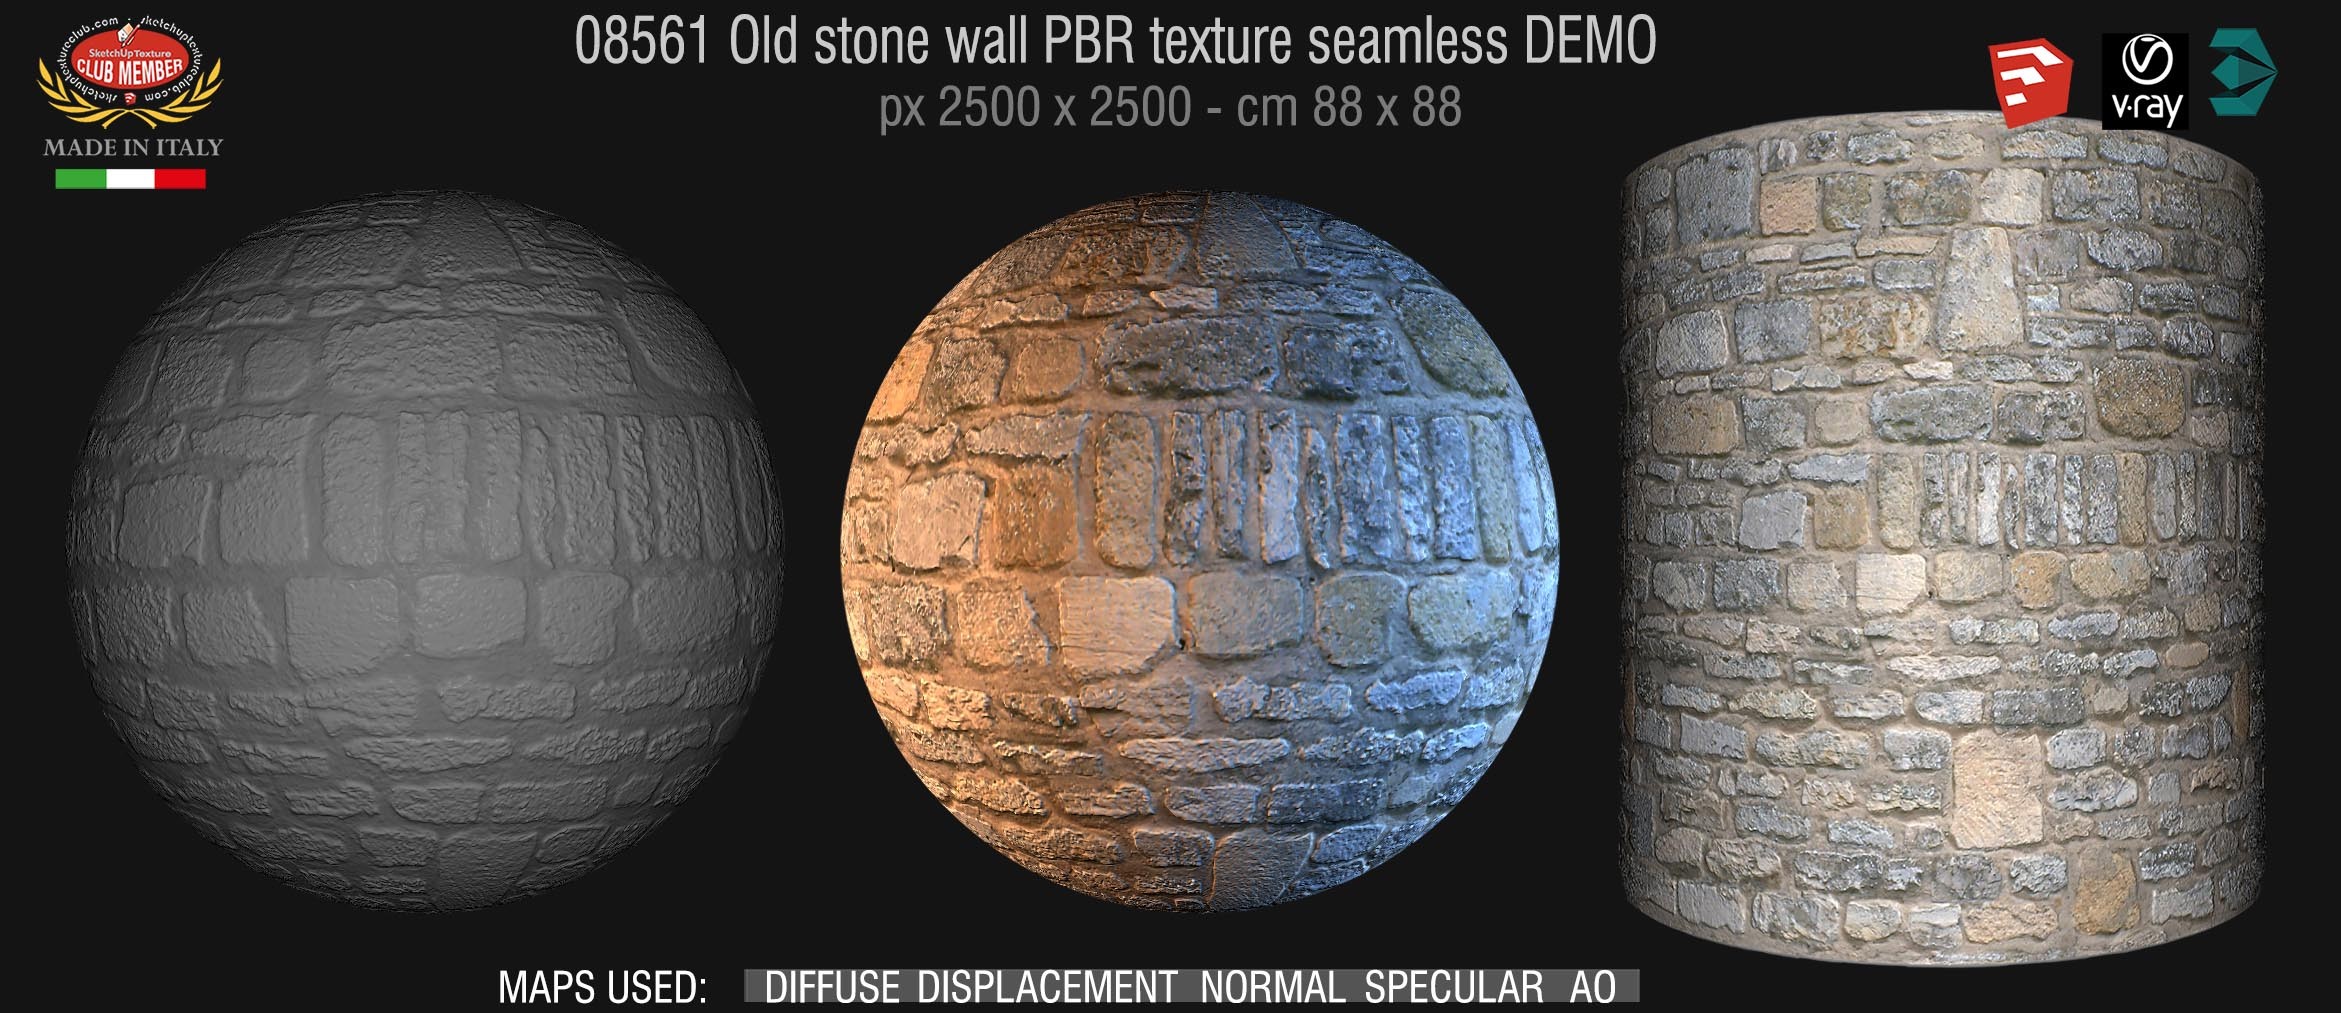 08561 Old stone wall PBR texture seamless DEMO